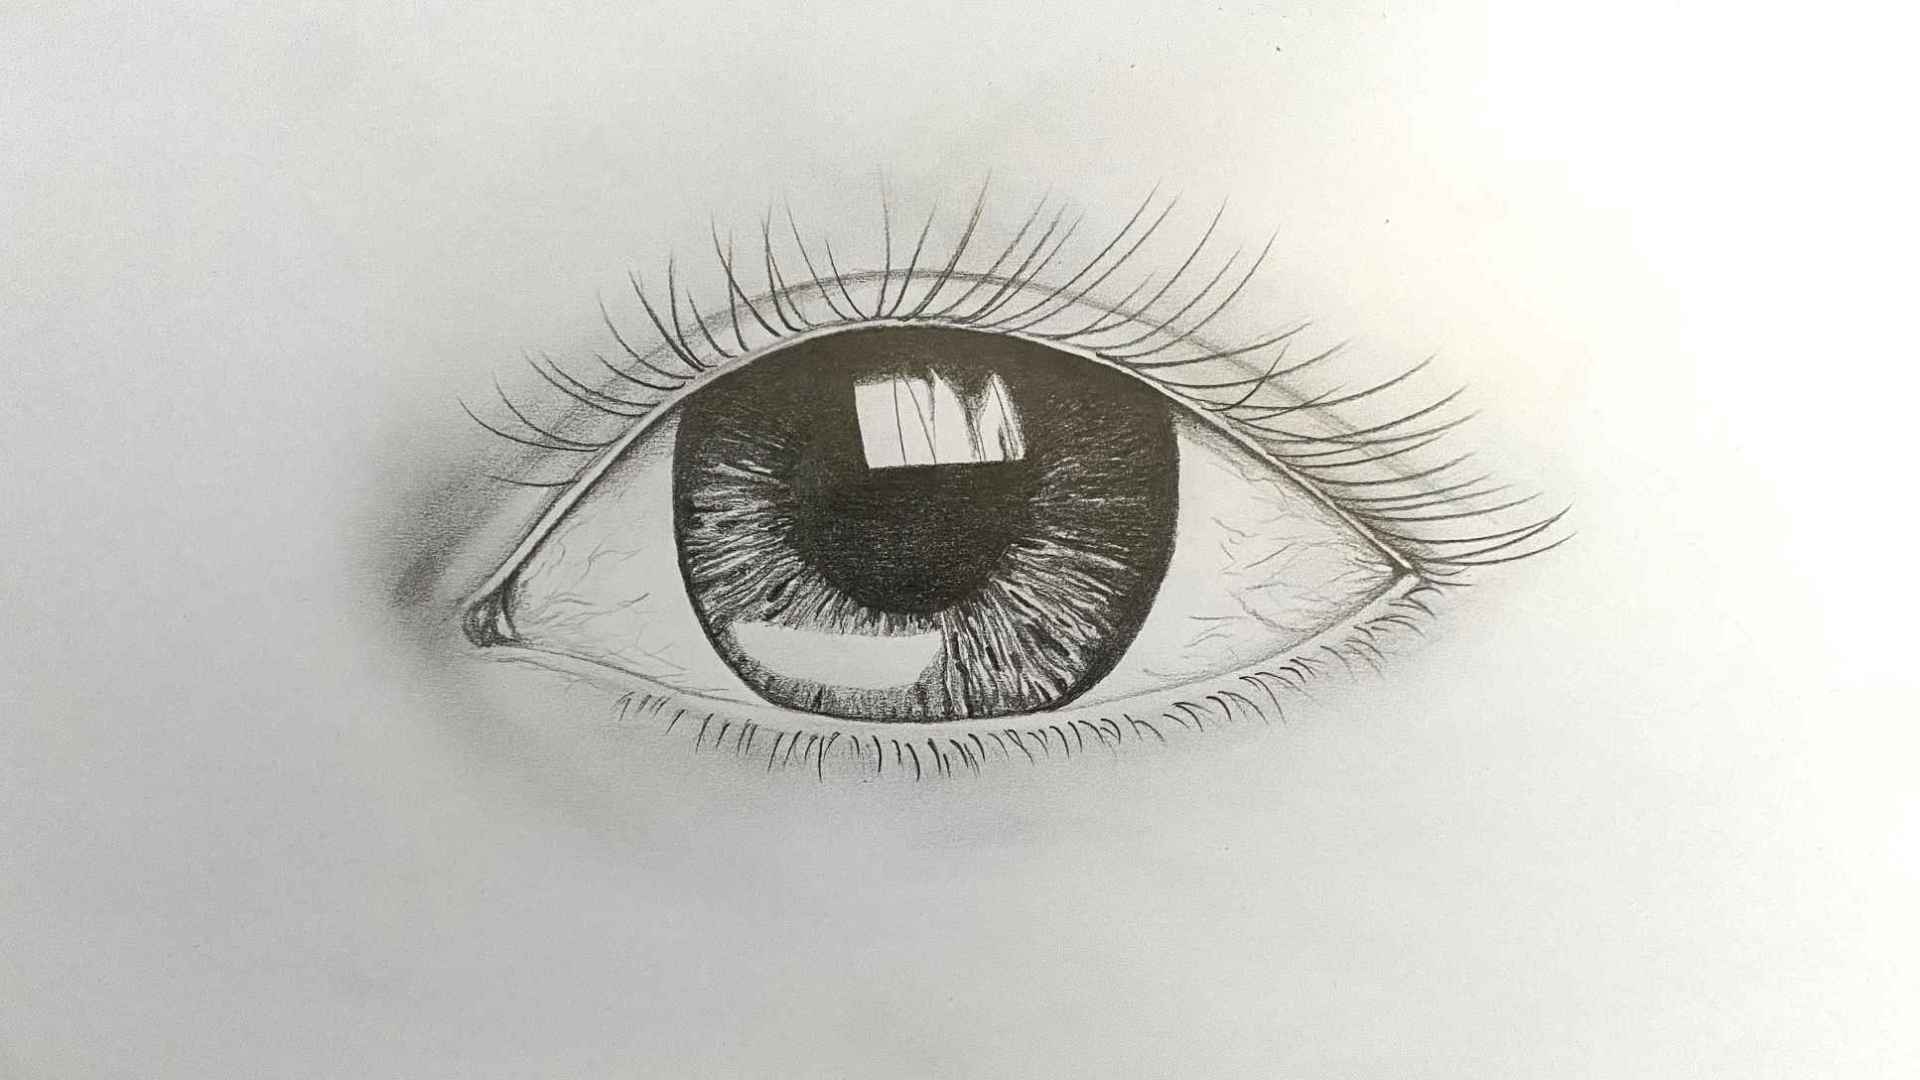 Drawing A Realistic Eye: Learn A Step By Step Method | Emily Armstrong |  Skillshare